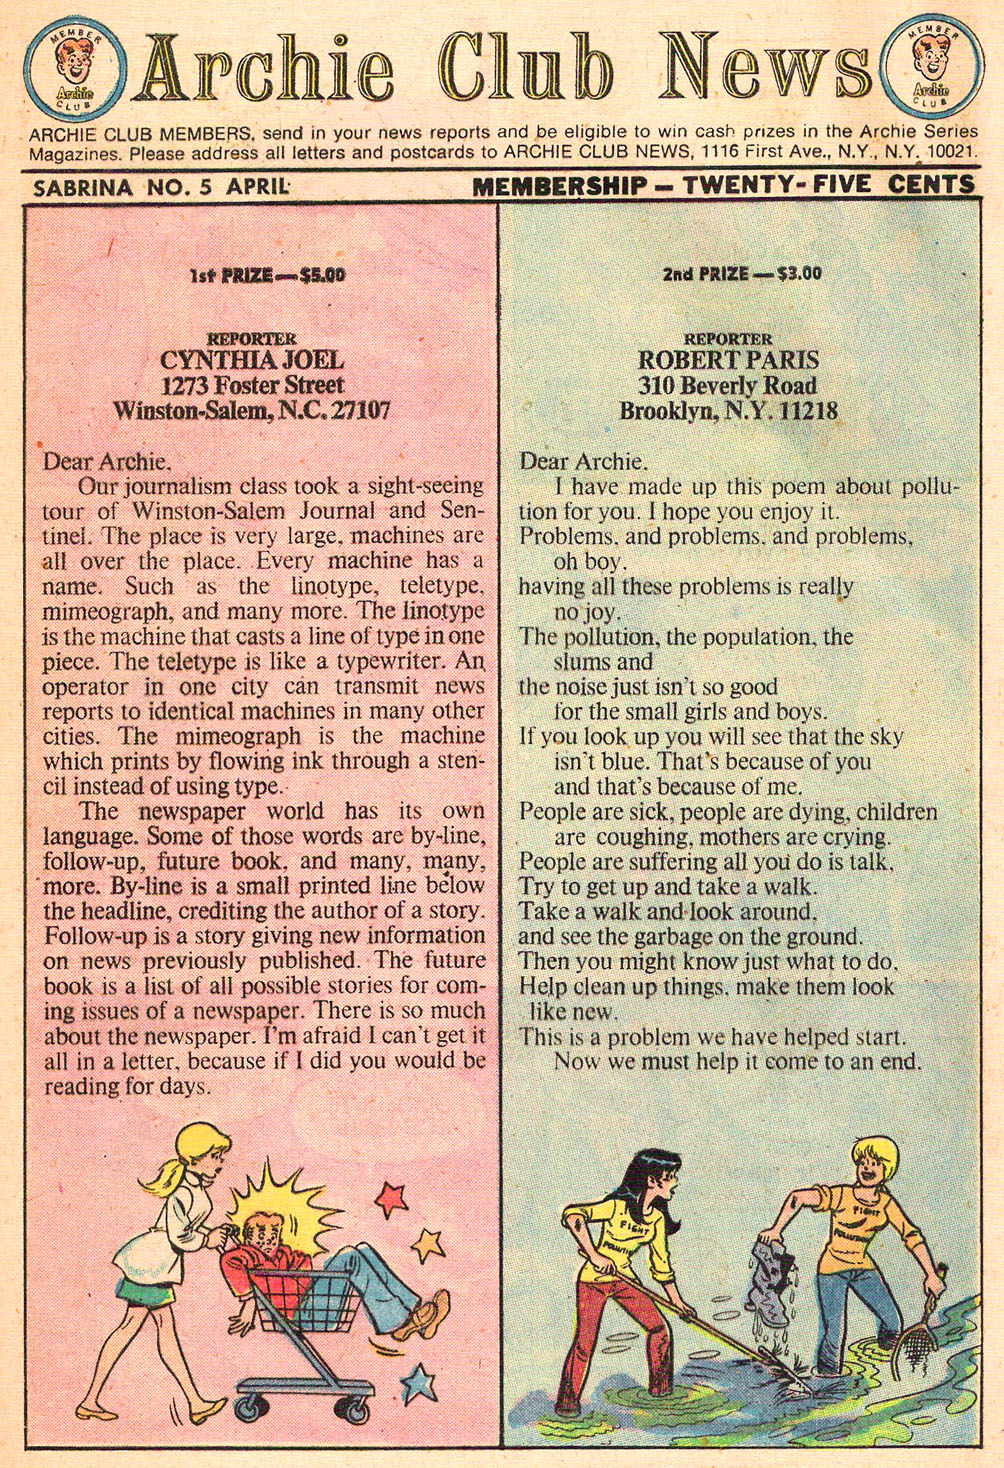 Sabrina The Teenage Witch (1971) Issue #5 #5 - English 22